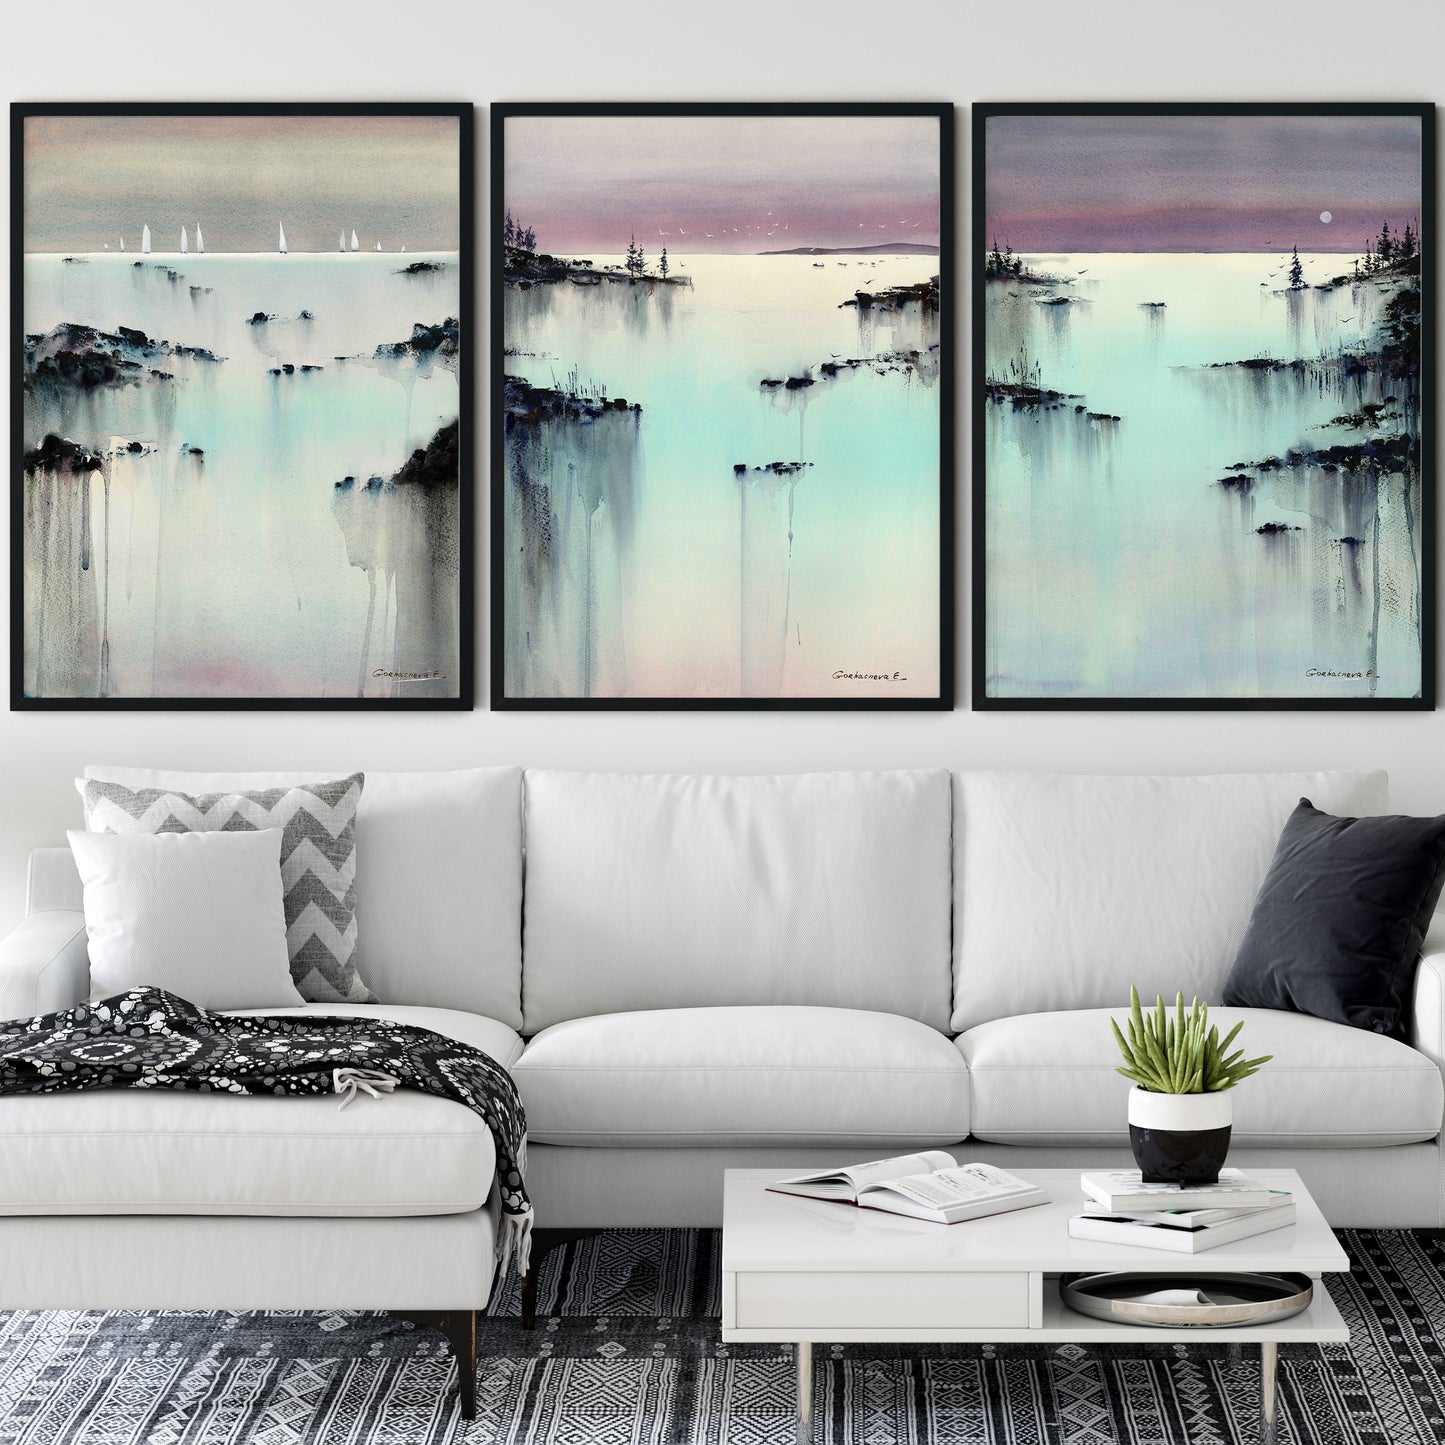 Abstract Coast Set of 3 Nature Prints, Pine Tree Art, Turquoise Lake, Pink, Landscape Canvas Paintings, Decor Above Sofa